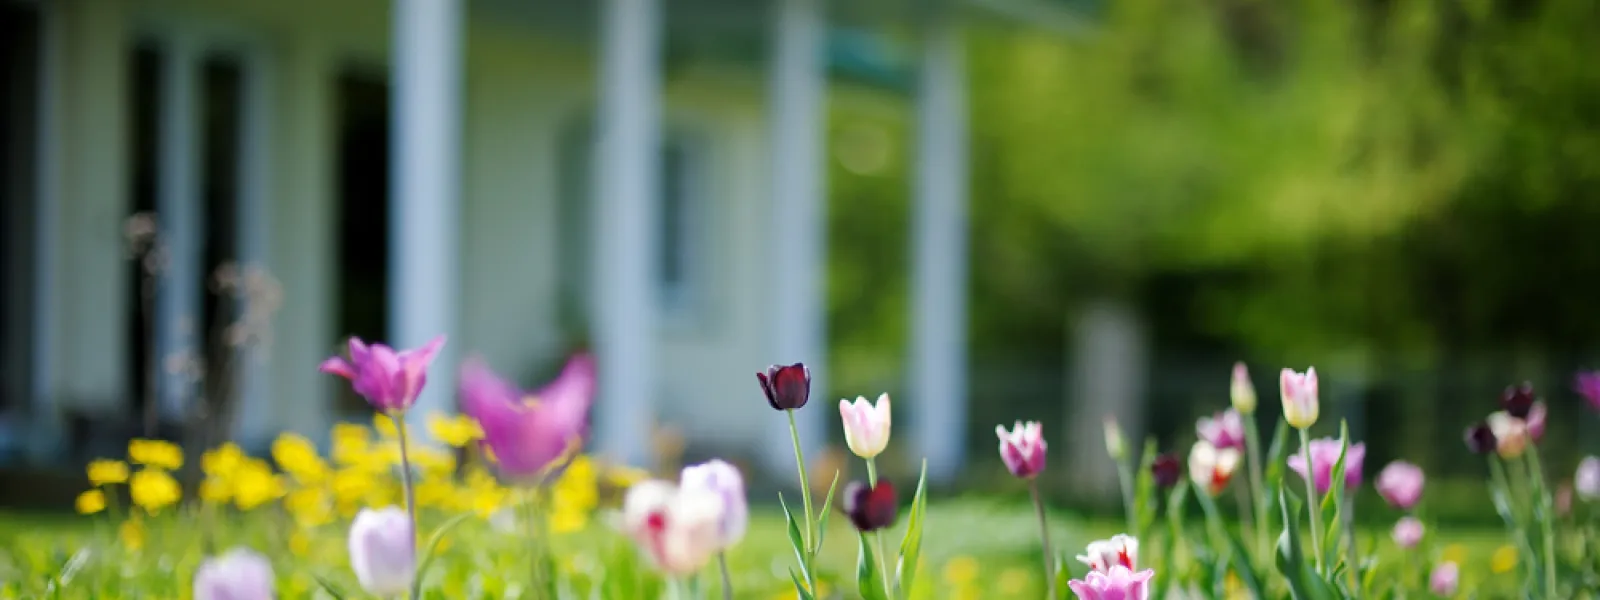 5 Home Improvement Ideas for Spring